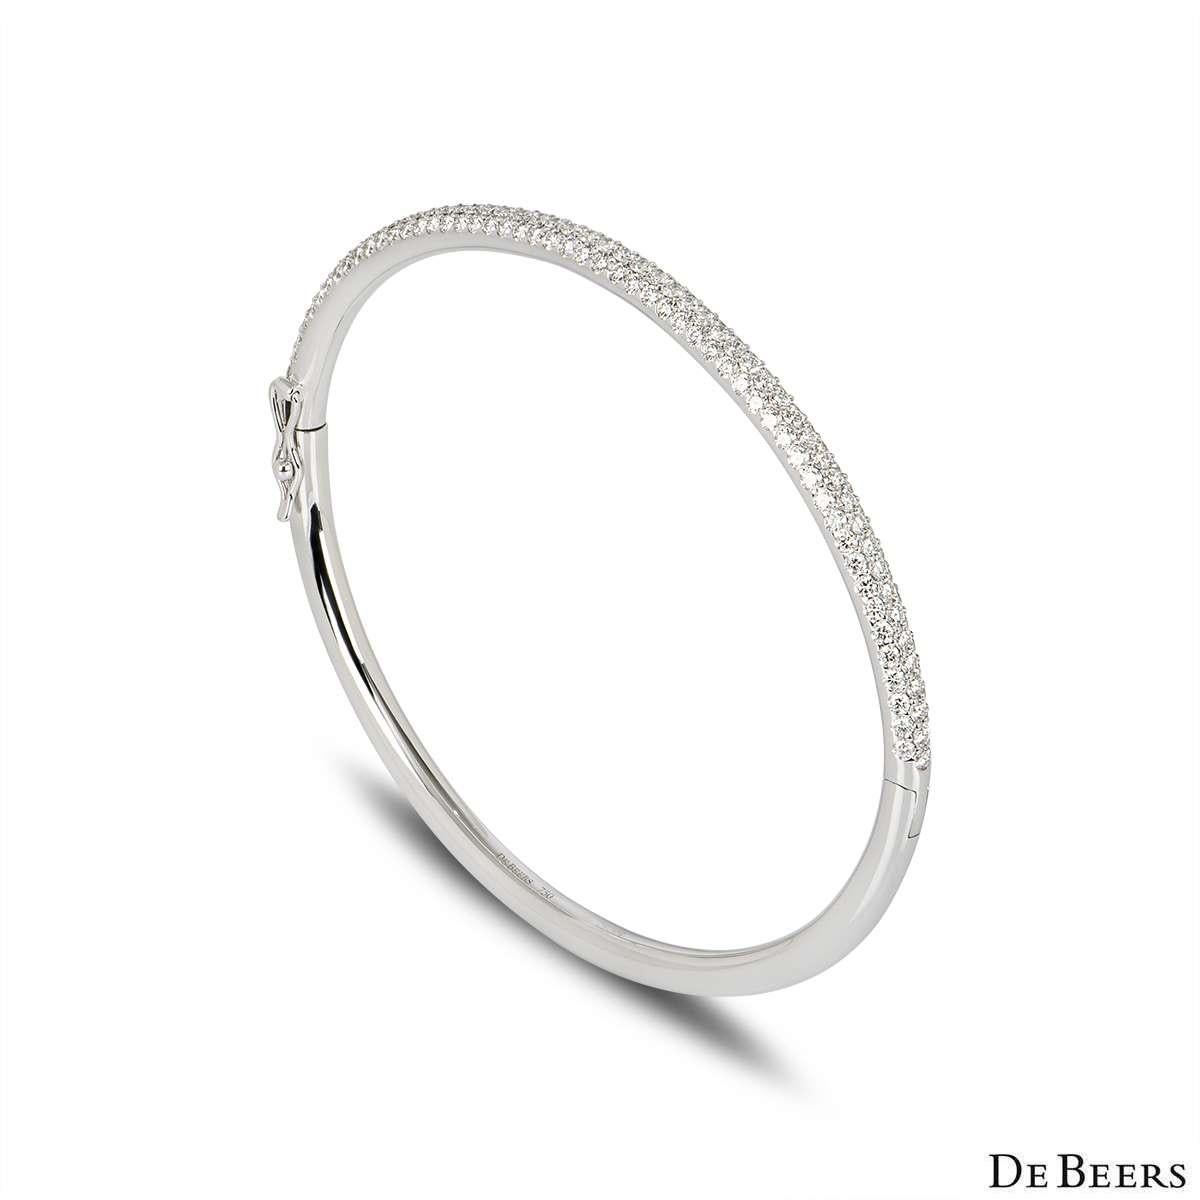 An elegant 18k white gold diamond bangle by De Beers from the Classics collection. The bangle features 162 micropave set round brilliant cut diamonds totalling 2.03ct, predominately F-G colour and VS+ clarity. The bangle fits a wrist up to 16cm,